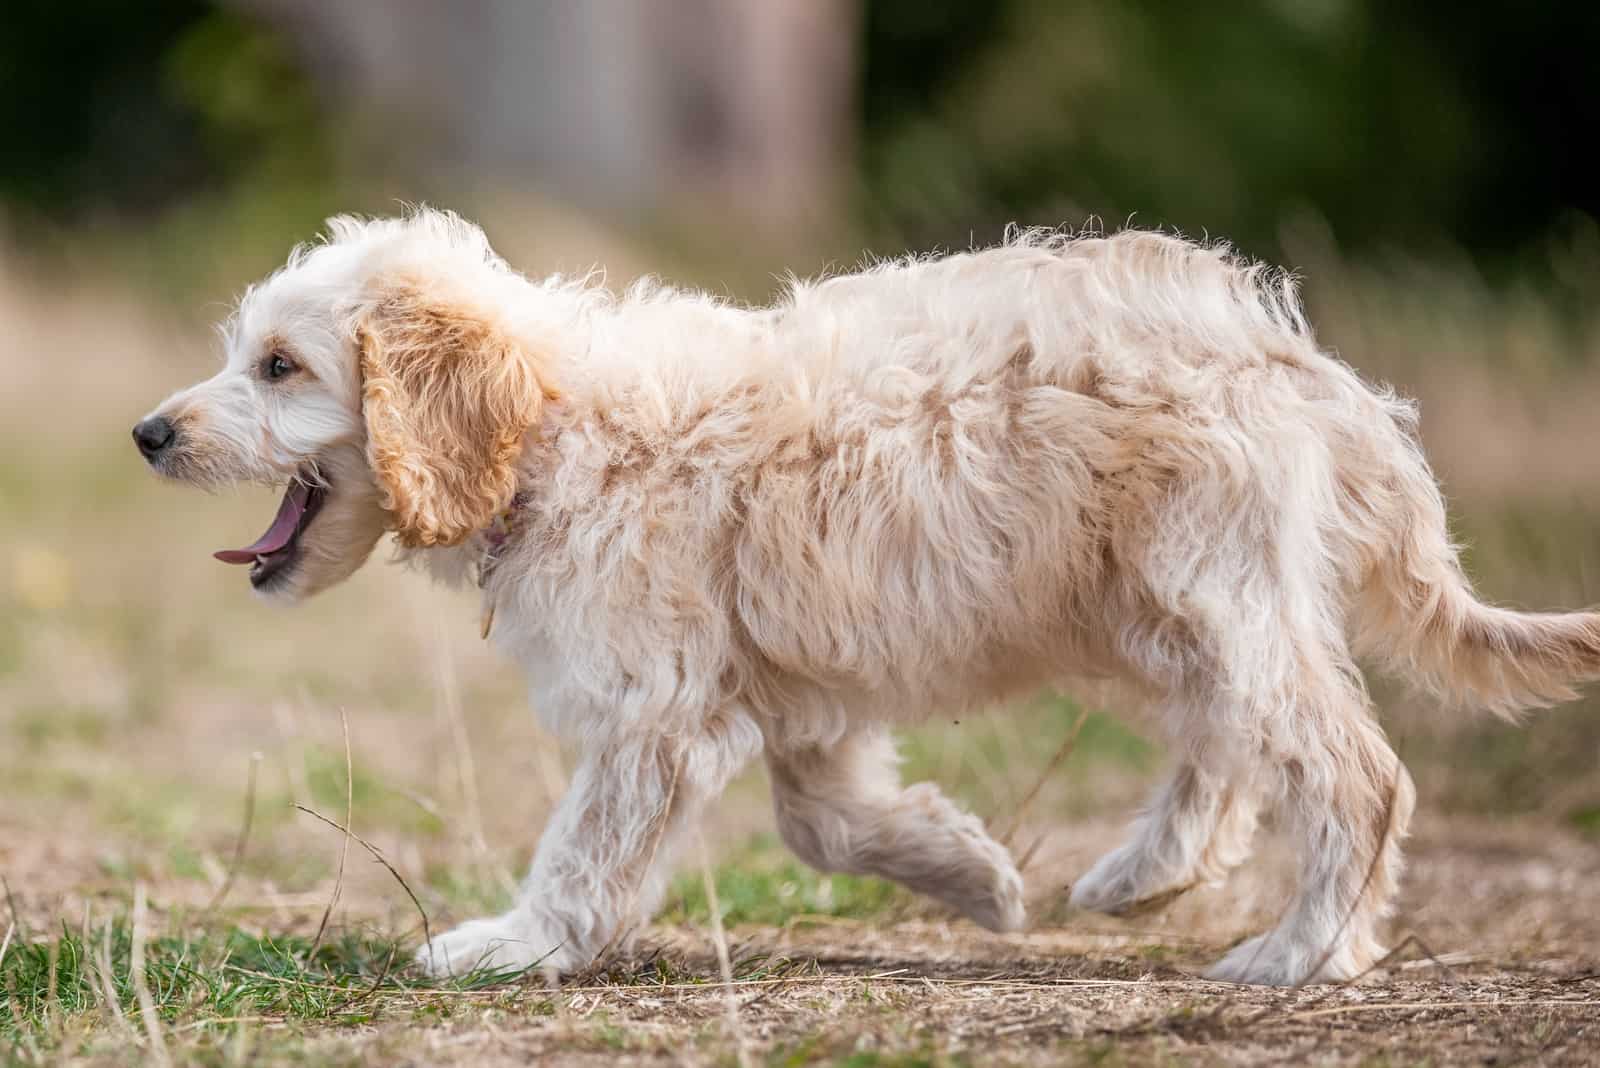 A cockapoo puppy walking and yawning on rough grass